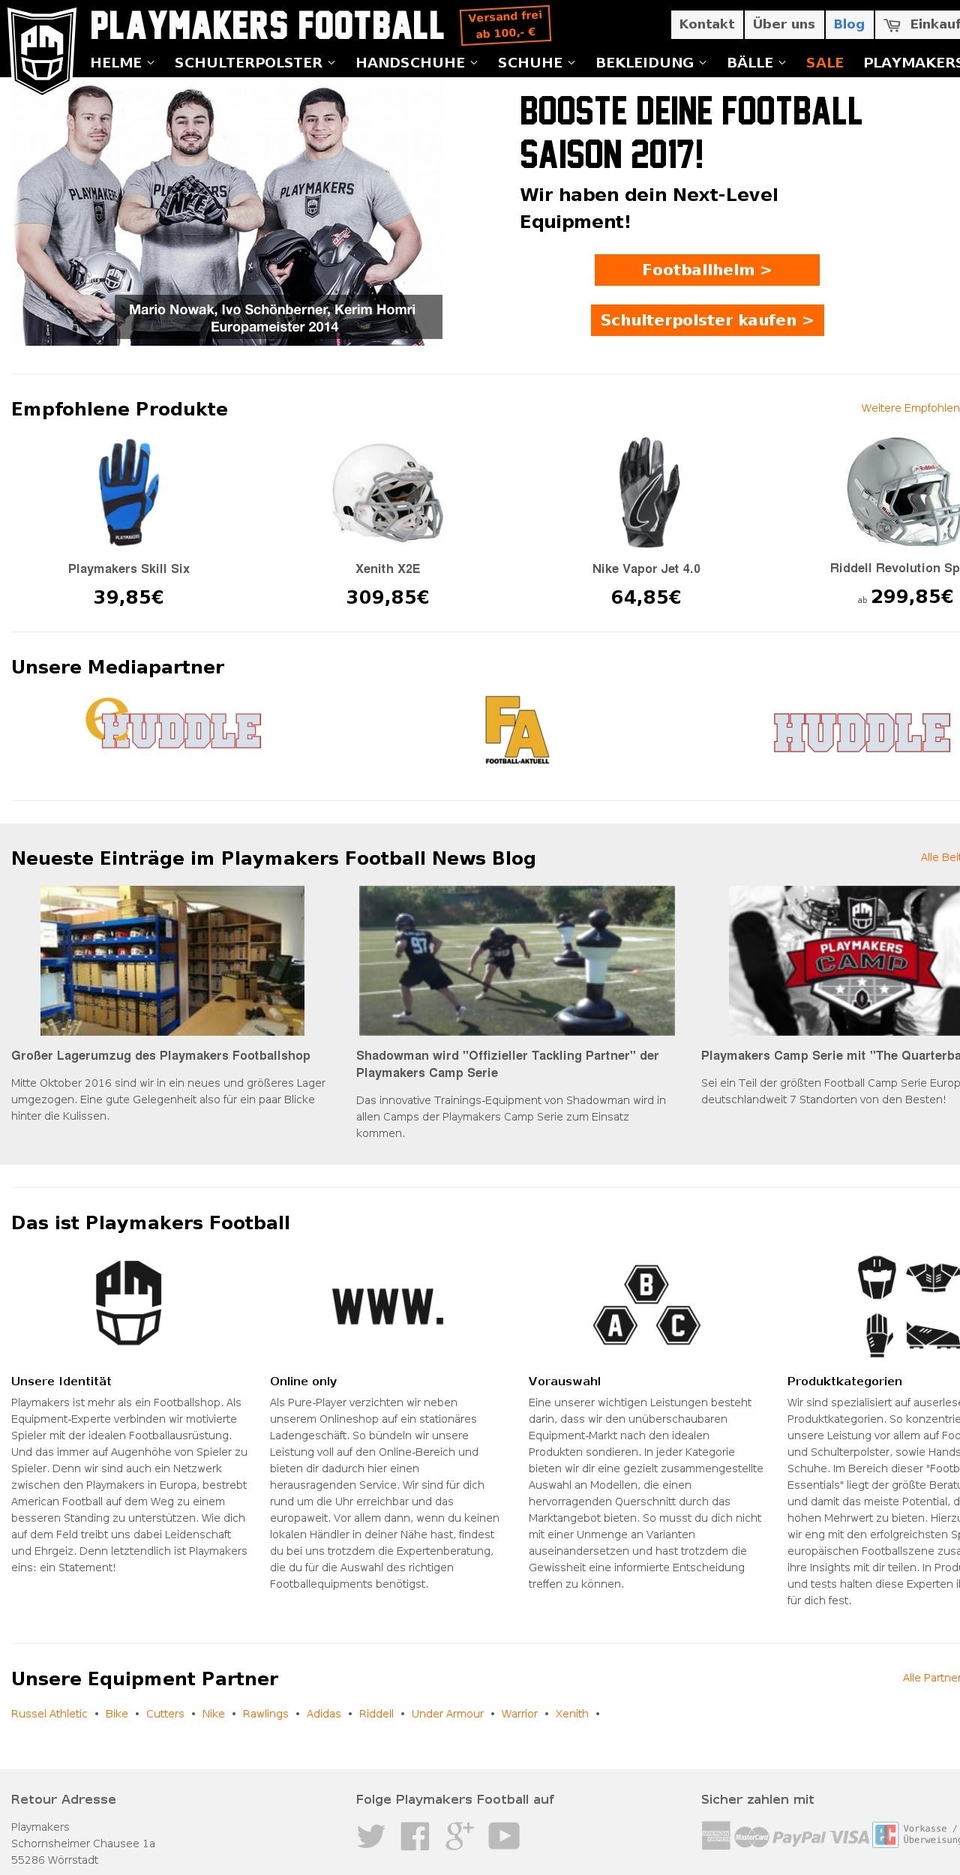 Playmakers Football v2 Shopify theme site example play-makers.de